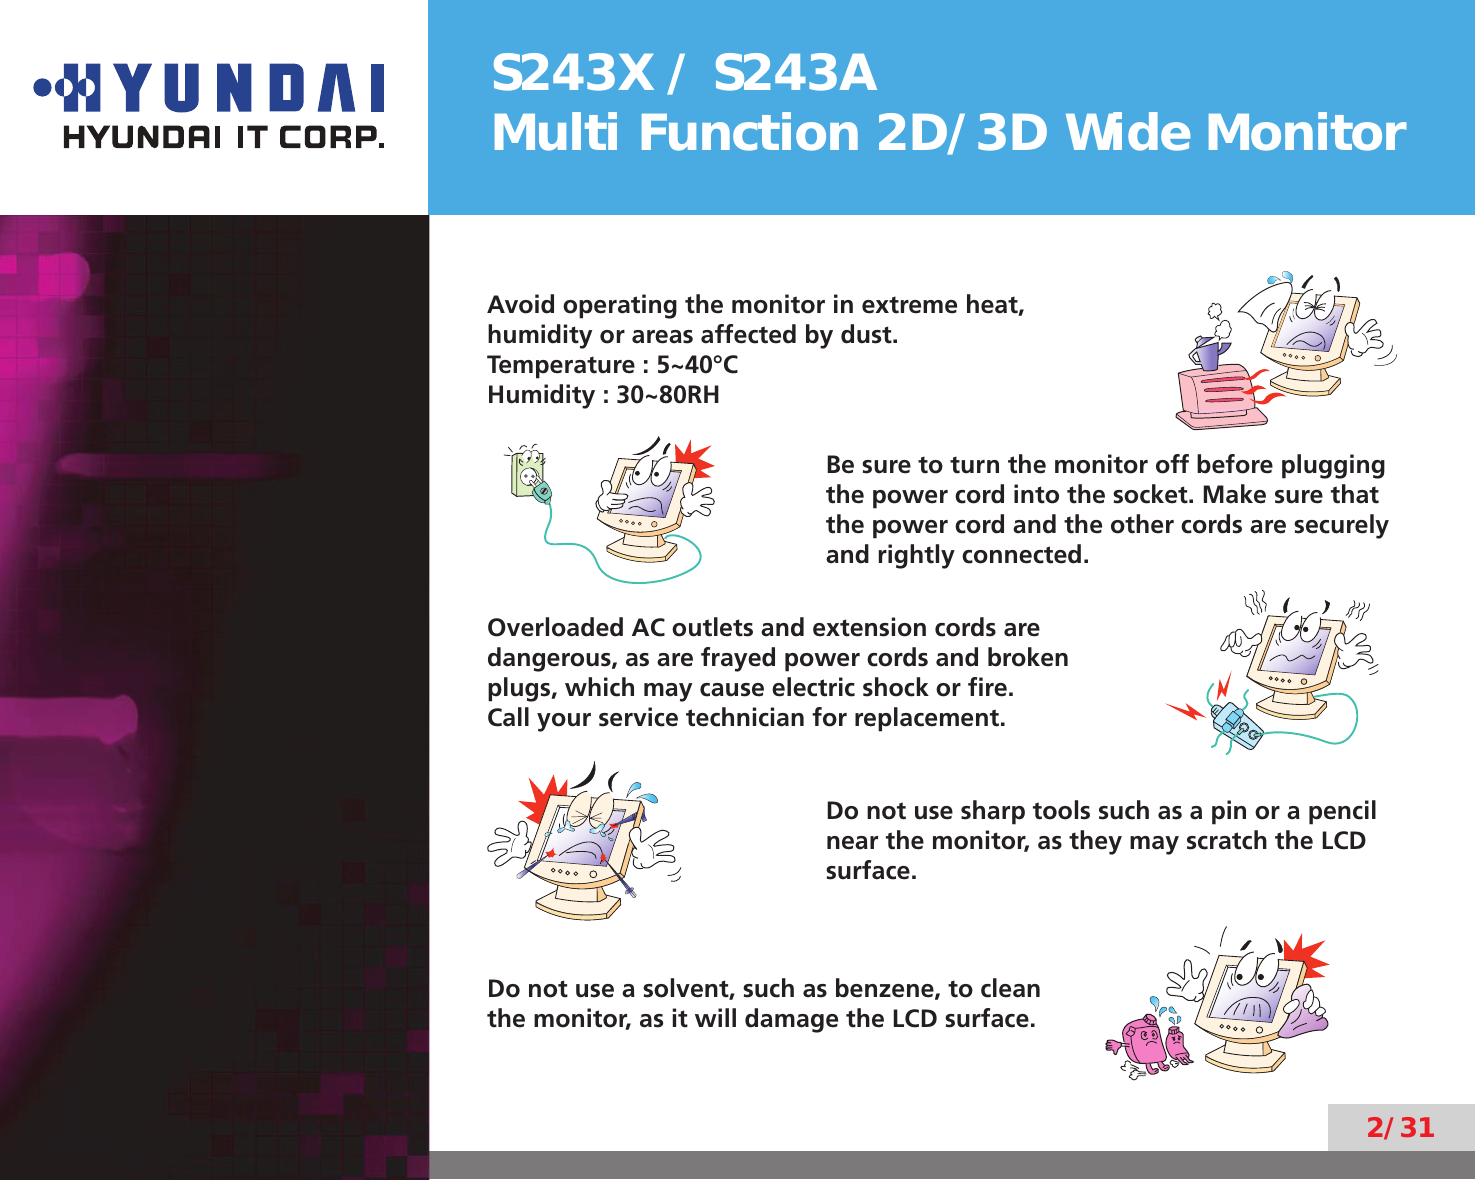 S243X / S243AMulti Function 2D/3D Wide Monitor2/31Avoid operating the monitor in extreme heat,humidity or areas affected by dust.Temperature : 5~40°CHumidity : 30~80RHBe sure to turn the monitor off before plugging the power cord into the socket. Make sure that the power cord and the other cords are securely and rightly connected.Overloaded AC outlets and extension cords are dangerous, as are frayed power cords and broken plugs, which may cause electric shock or ﬁre.  Call your service technician for replacement.Do not use sharp tools such as a pin or a pencil near the monitor, as they may scratch the LCD surface.Do not use a solvent, such as benzene, to clean the monitor, as it will damage the LCD surface.